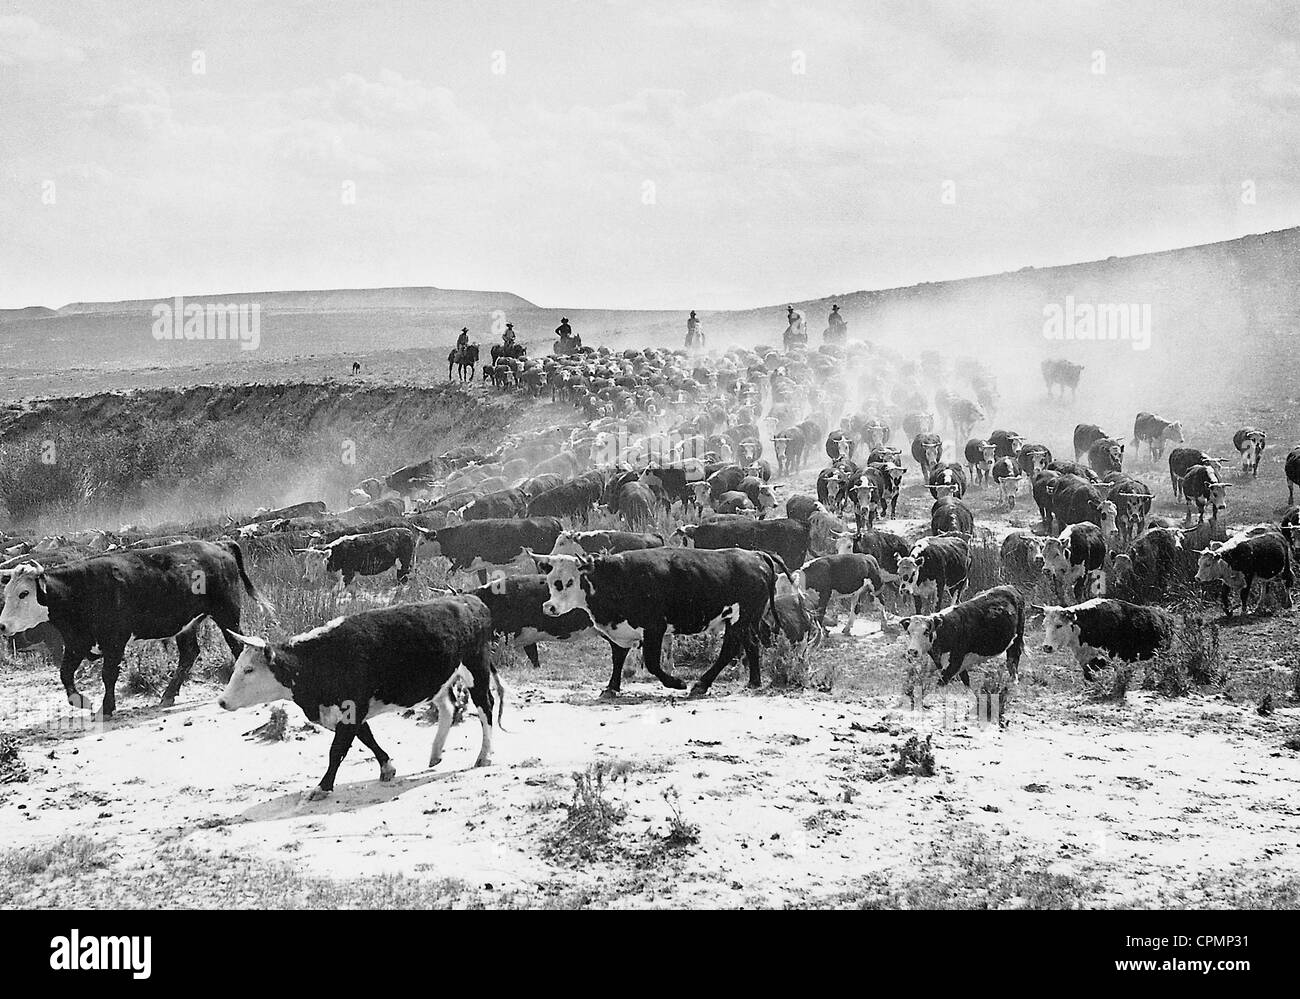 Cattle herd in the United States, 1928 Stock Photo